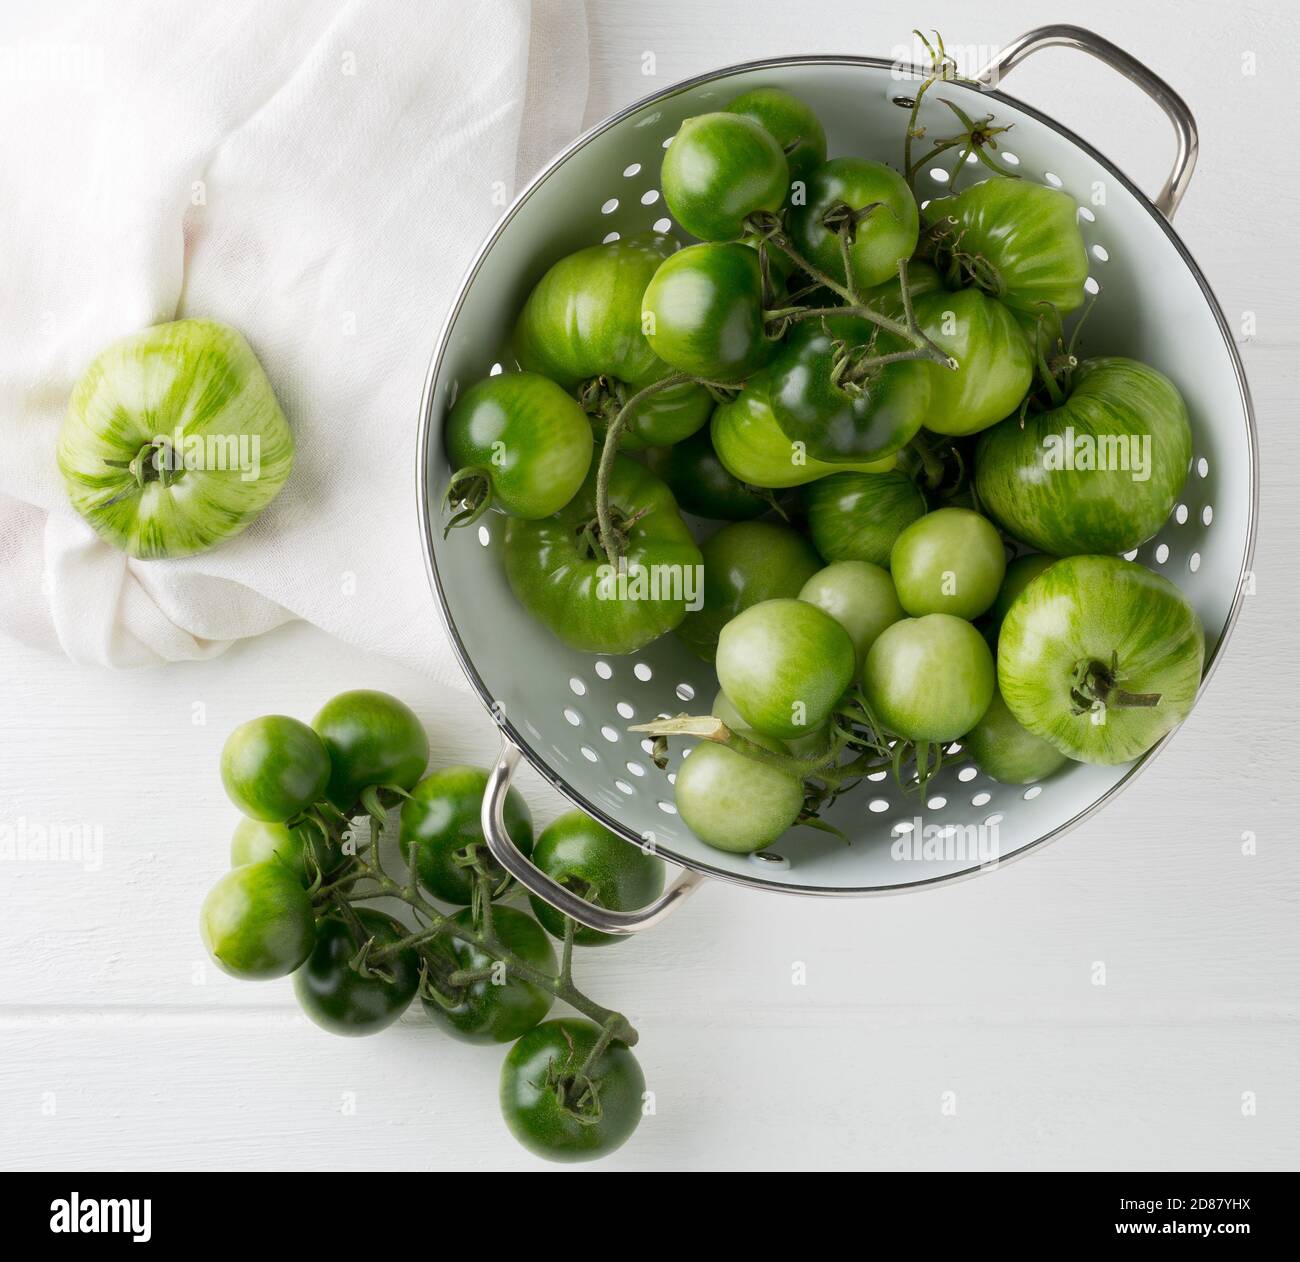 Unripe green tomatoes in colander and on table in white wooden kitchen background, unripe tomatoes can be fried or used for relish, selective focus, f Stock Photo